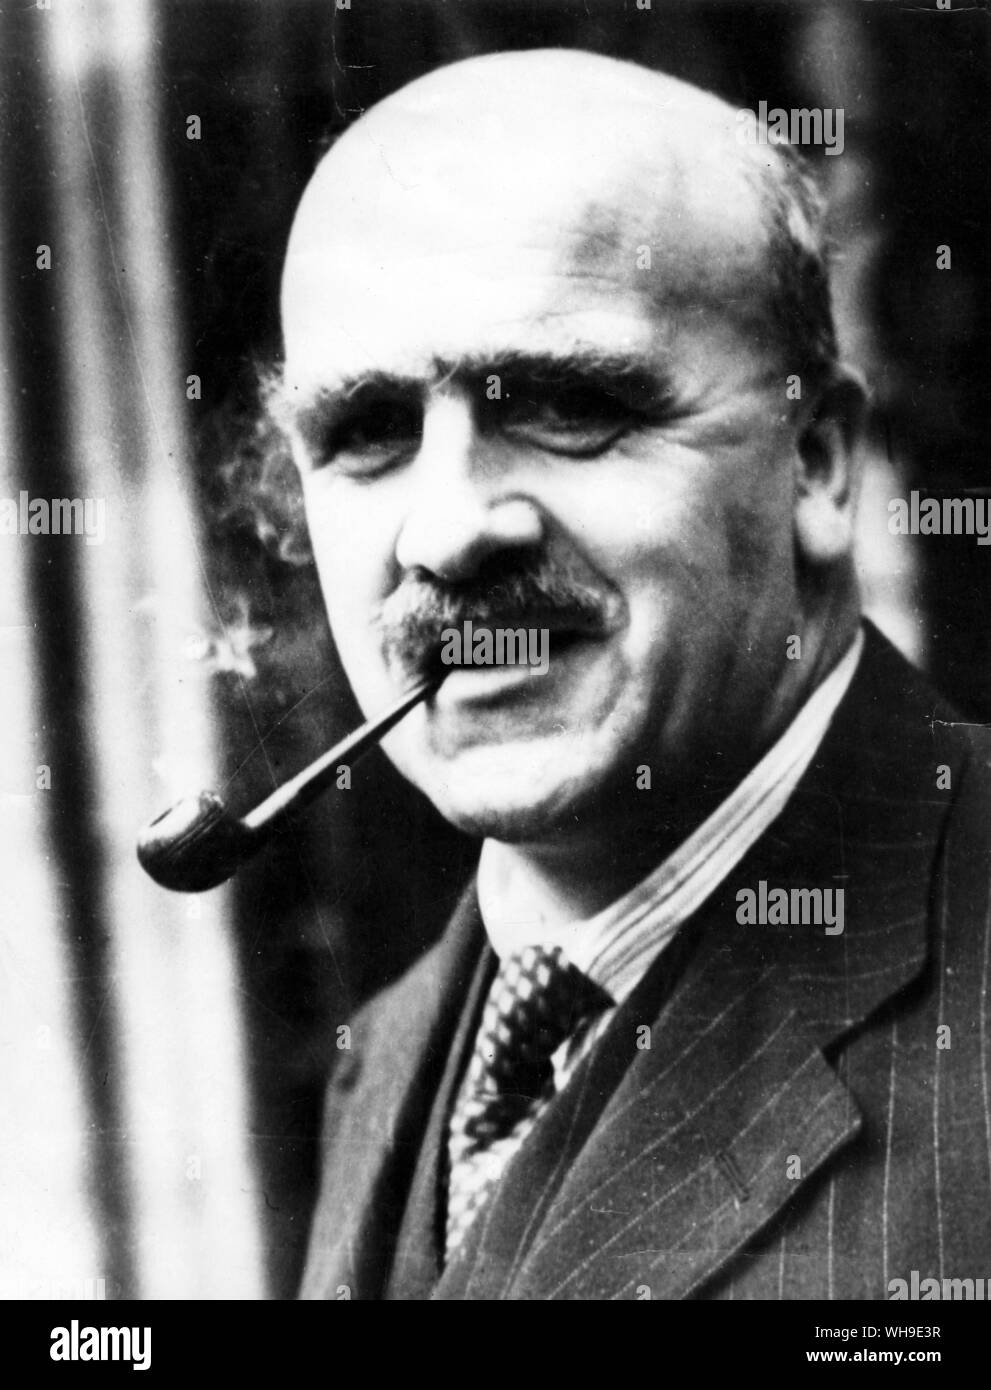 November 1956: British scientist, Professor John Burdon Sanderson Haldane (1892-1964) at the University College, London. Physiologist, geneticist and author of popular science books. In 1936, he showed the genetic link between haemophilia and colour blindness. Stock Photo